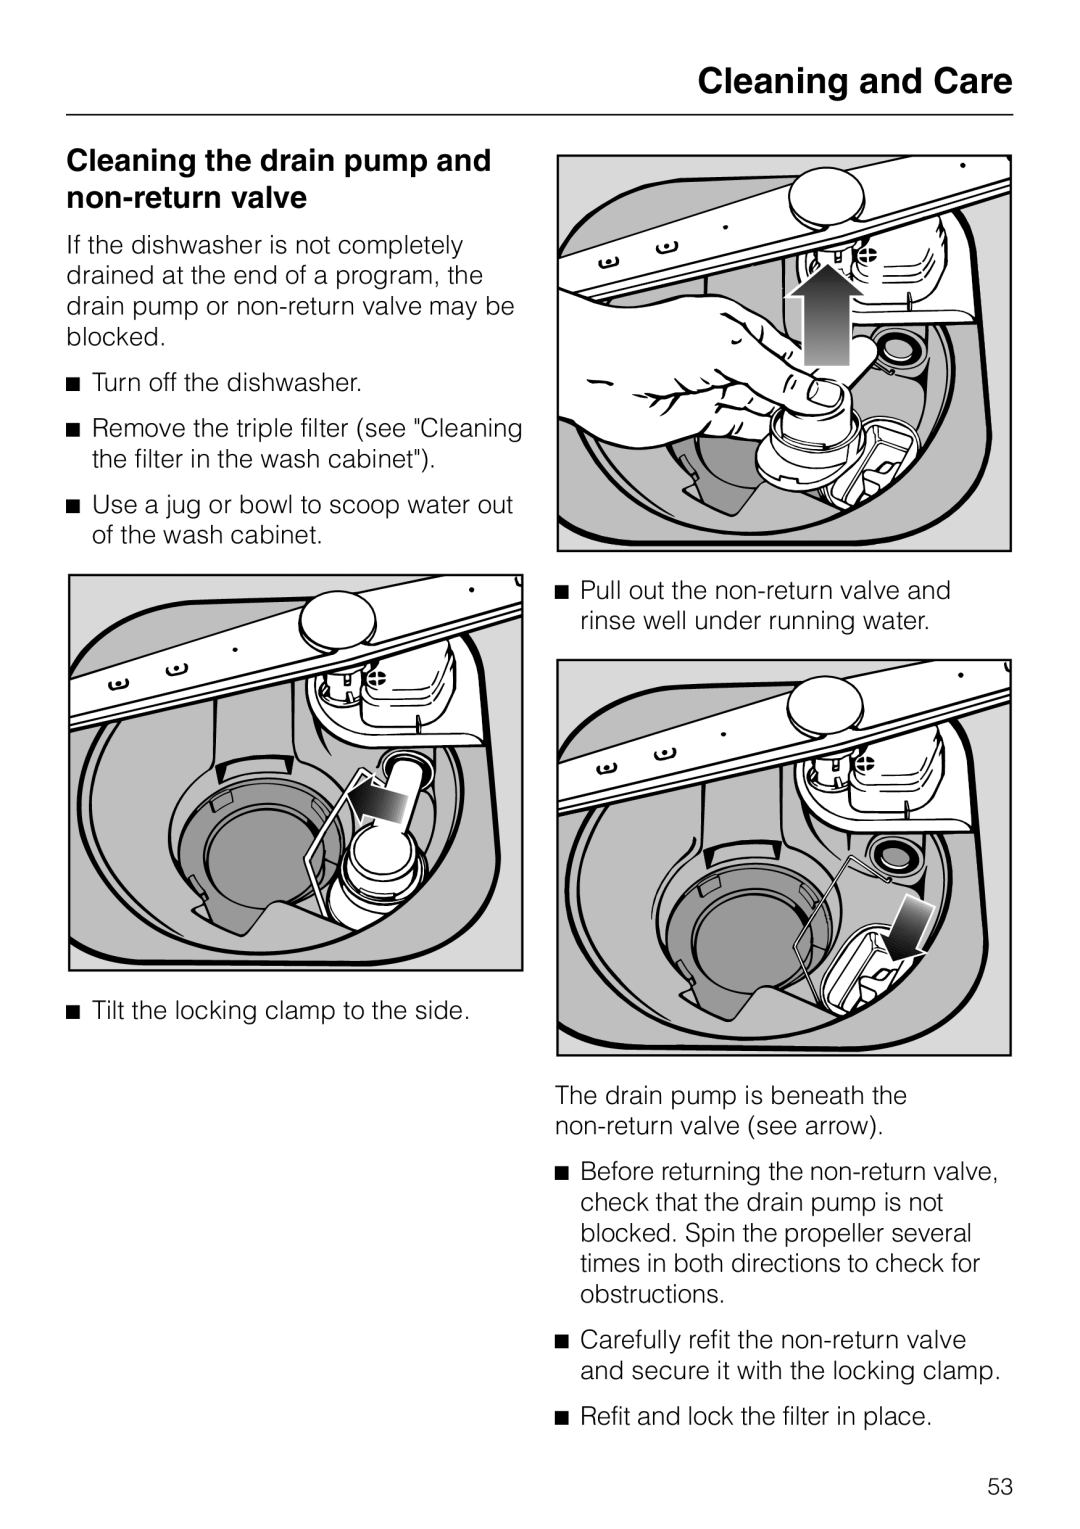 Miele Incognito manual Cleaning the drain pump and non-returnvalve, Cleaning and Care 